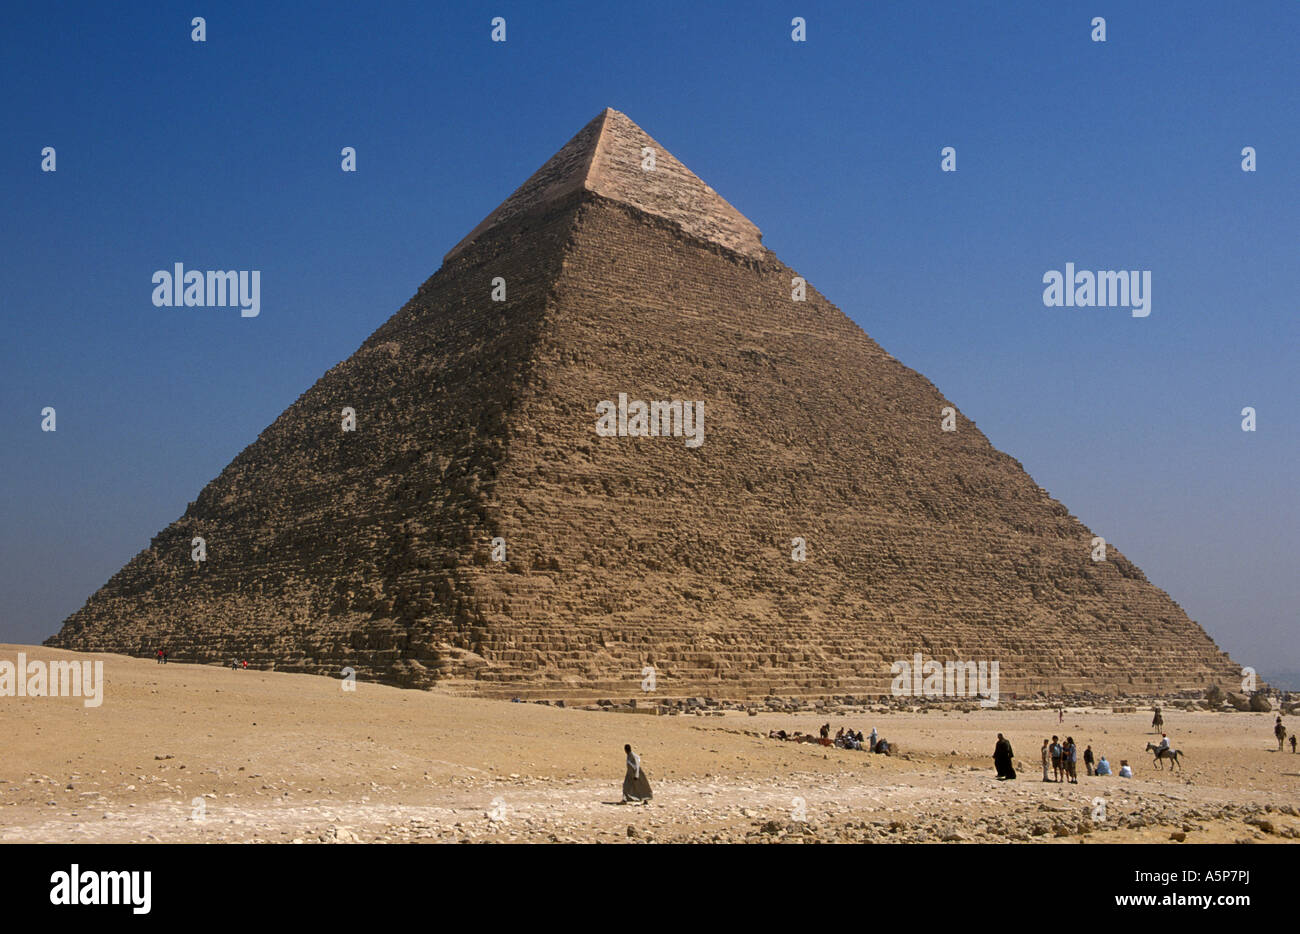 Pyramid of Khafre with limestone covering at the summit, Pyramids of Giza, Cairo, Egypt Stock Photo